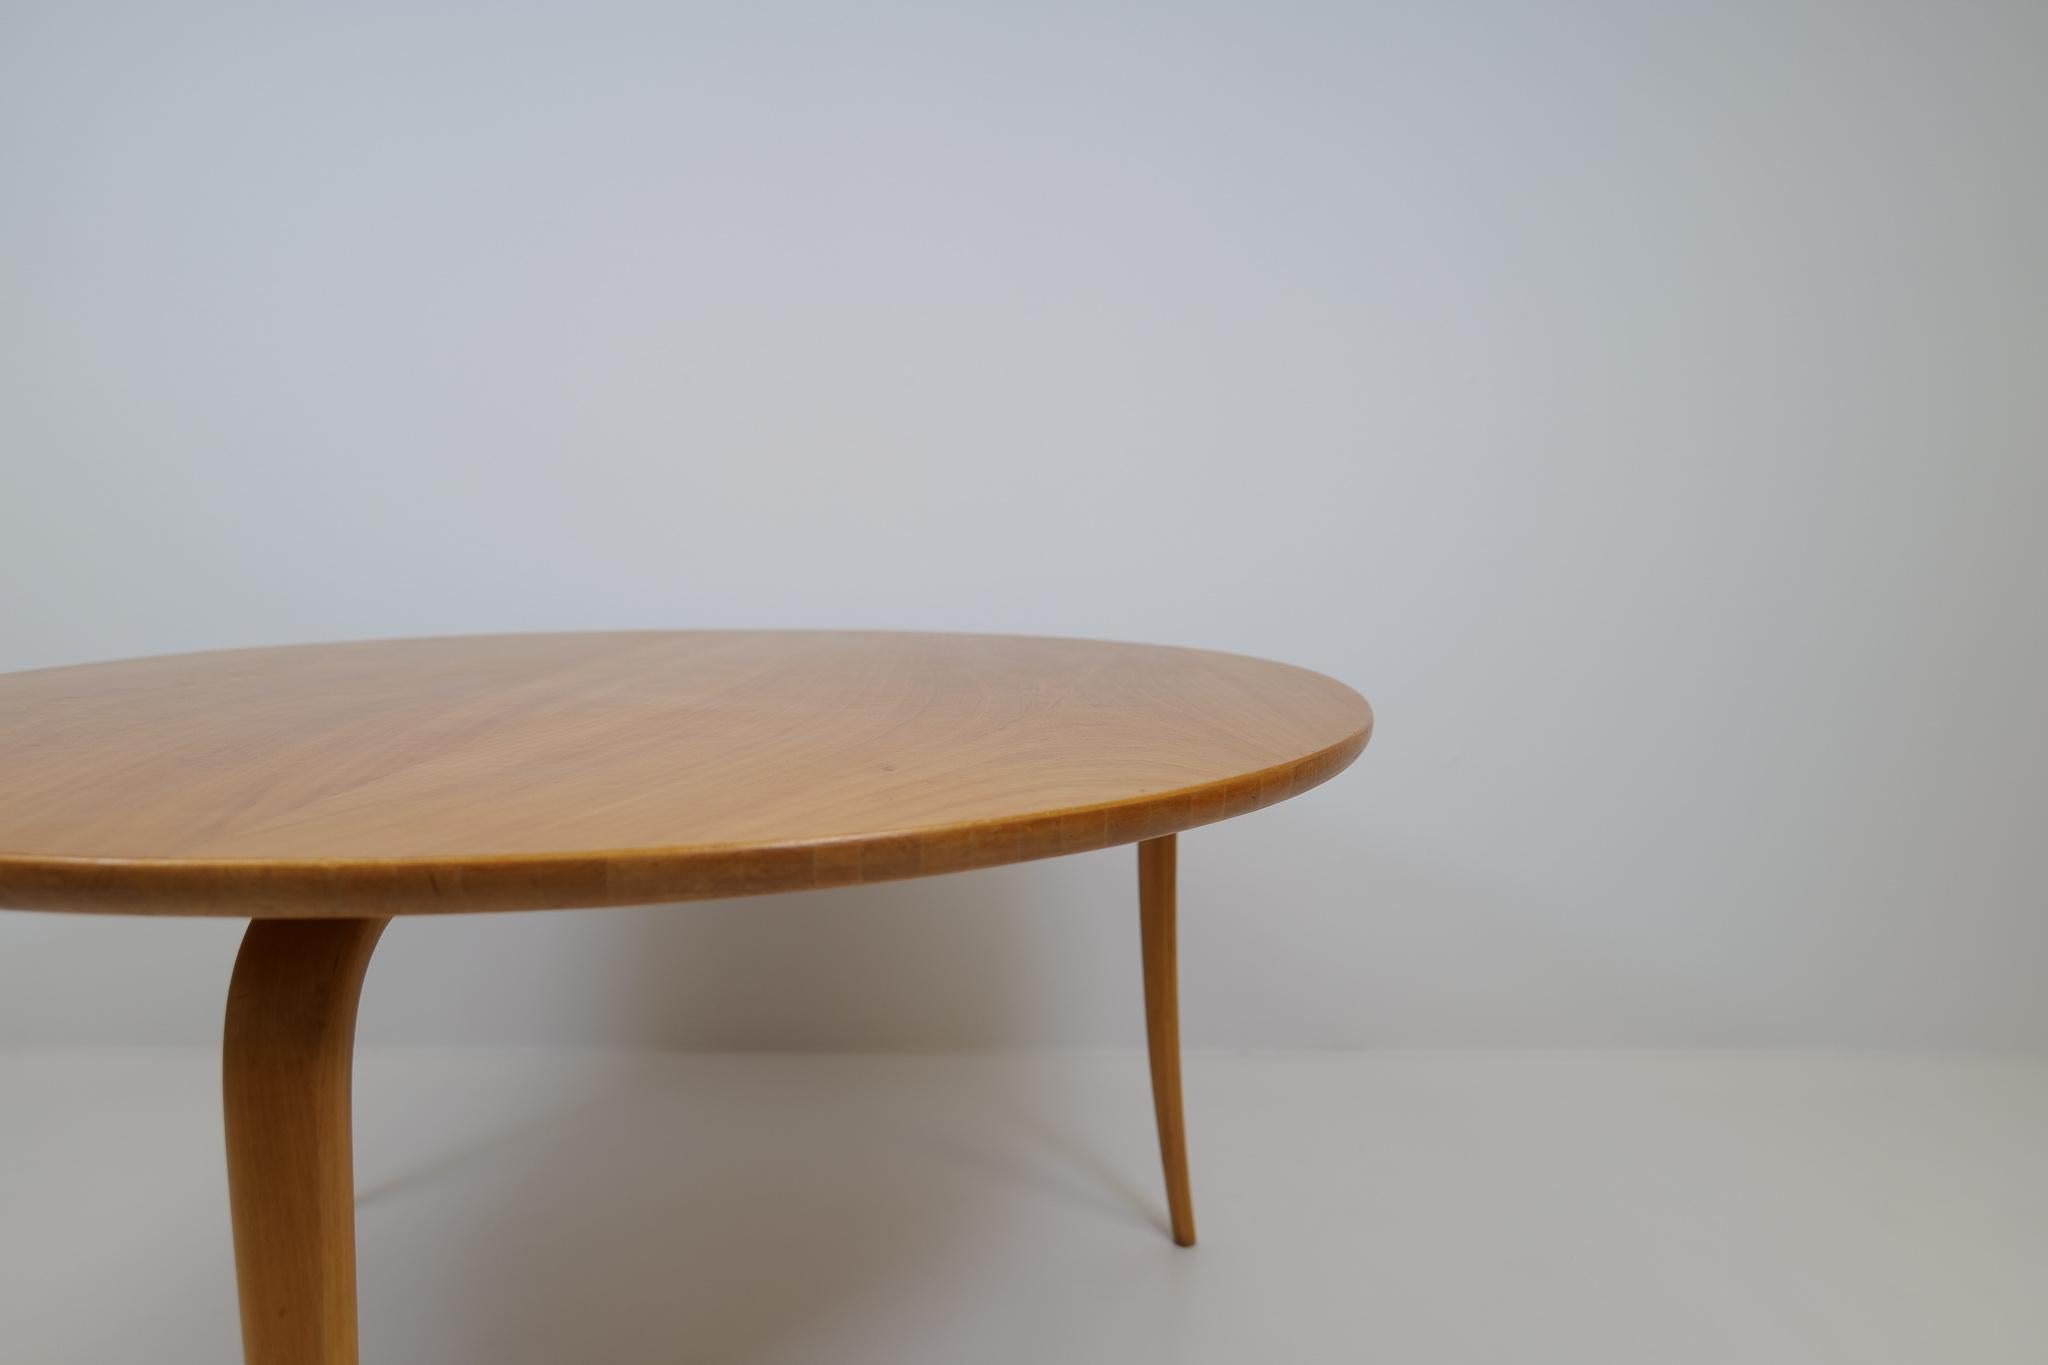 Birch Swedish Grace Early Bruno Mathsson Large 'Annika' Coffee Table 1930s For Sale